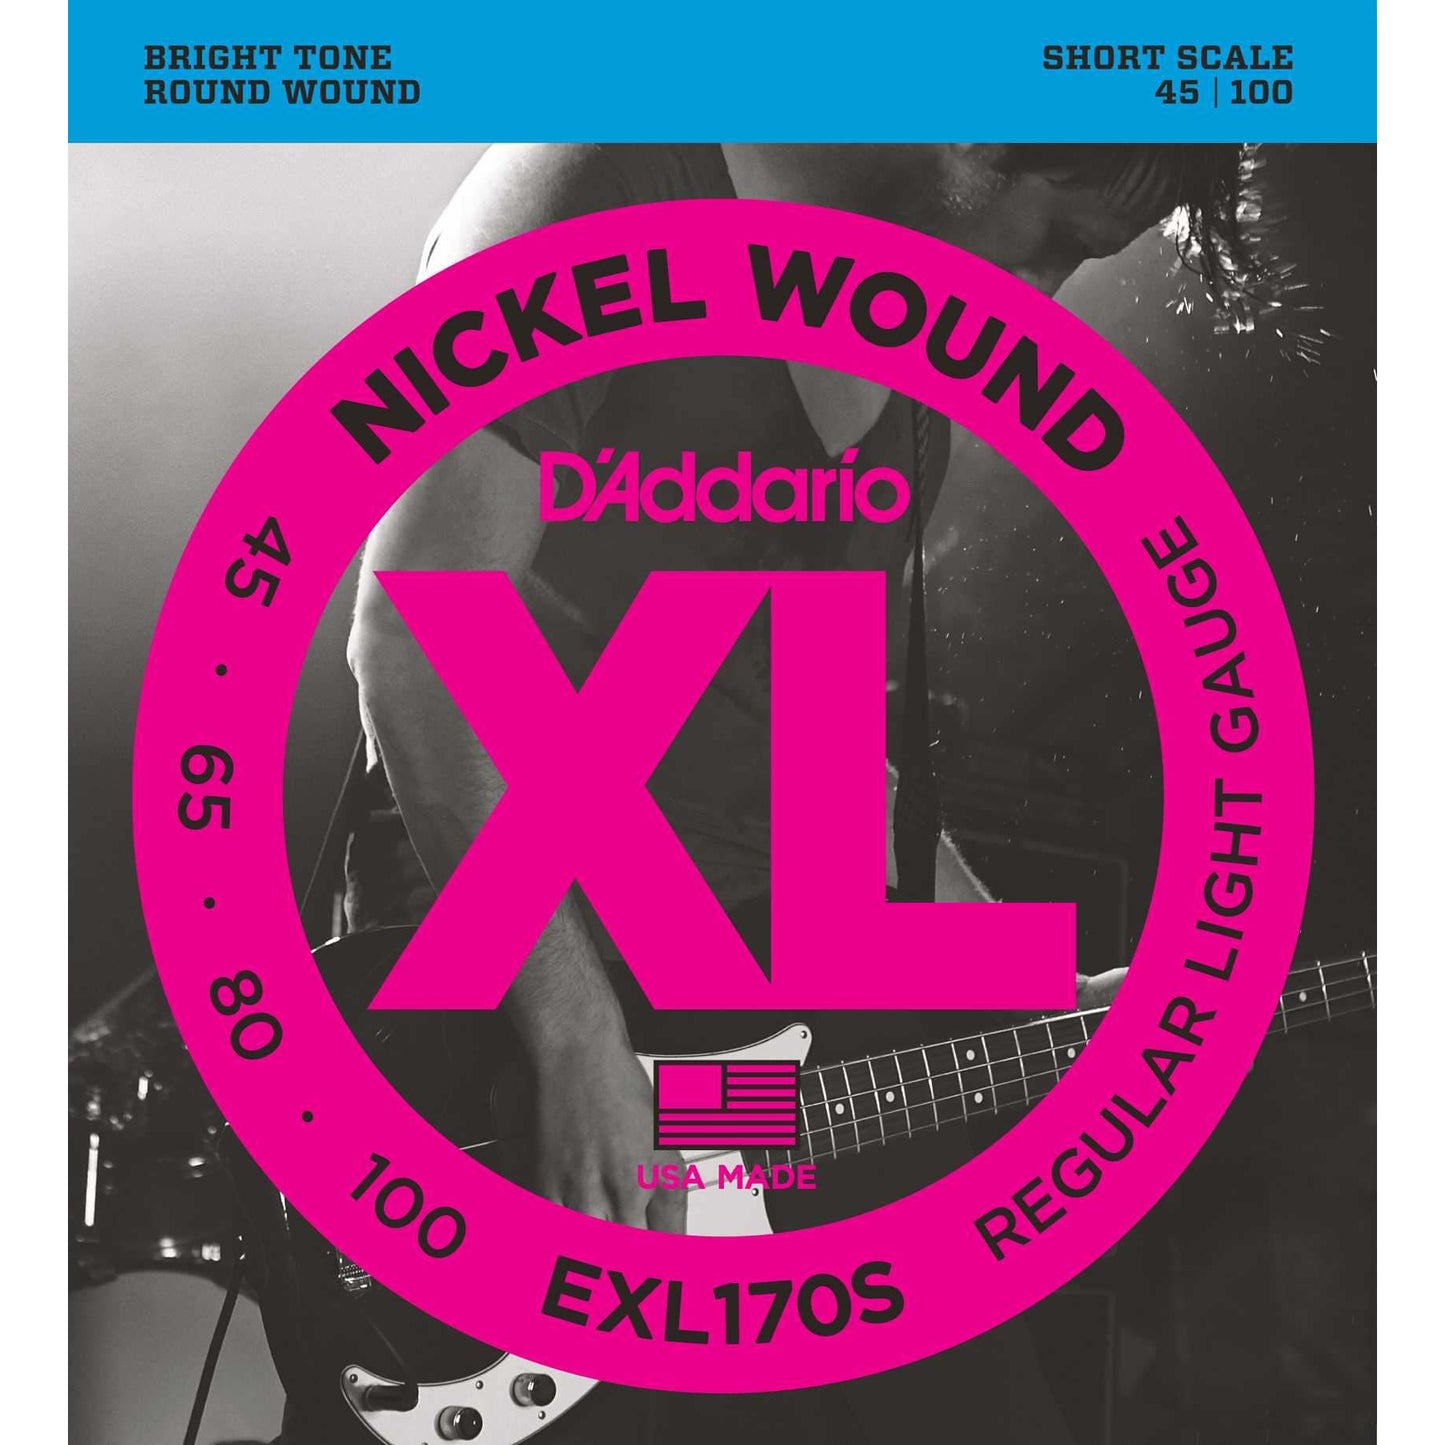 Image 2 of D'Addario EXL170S XL Nickel Round Wound Short Scale Light Gauge Electric Bass Strings - SKU# EXL170S : Product Type Strings : Elderly Instruments